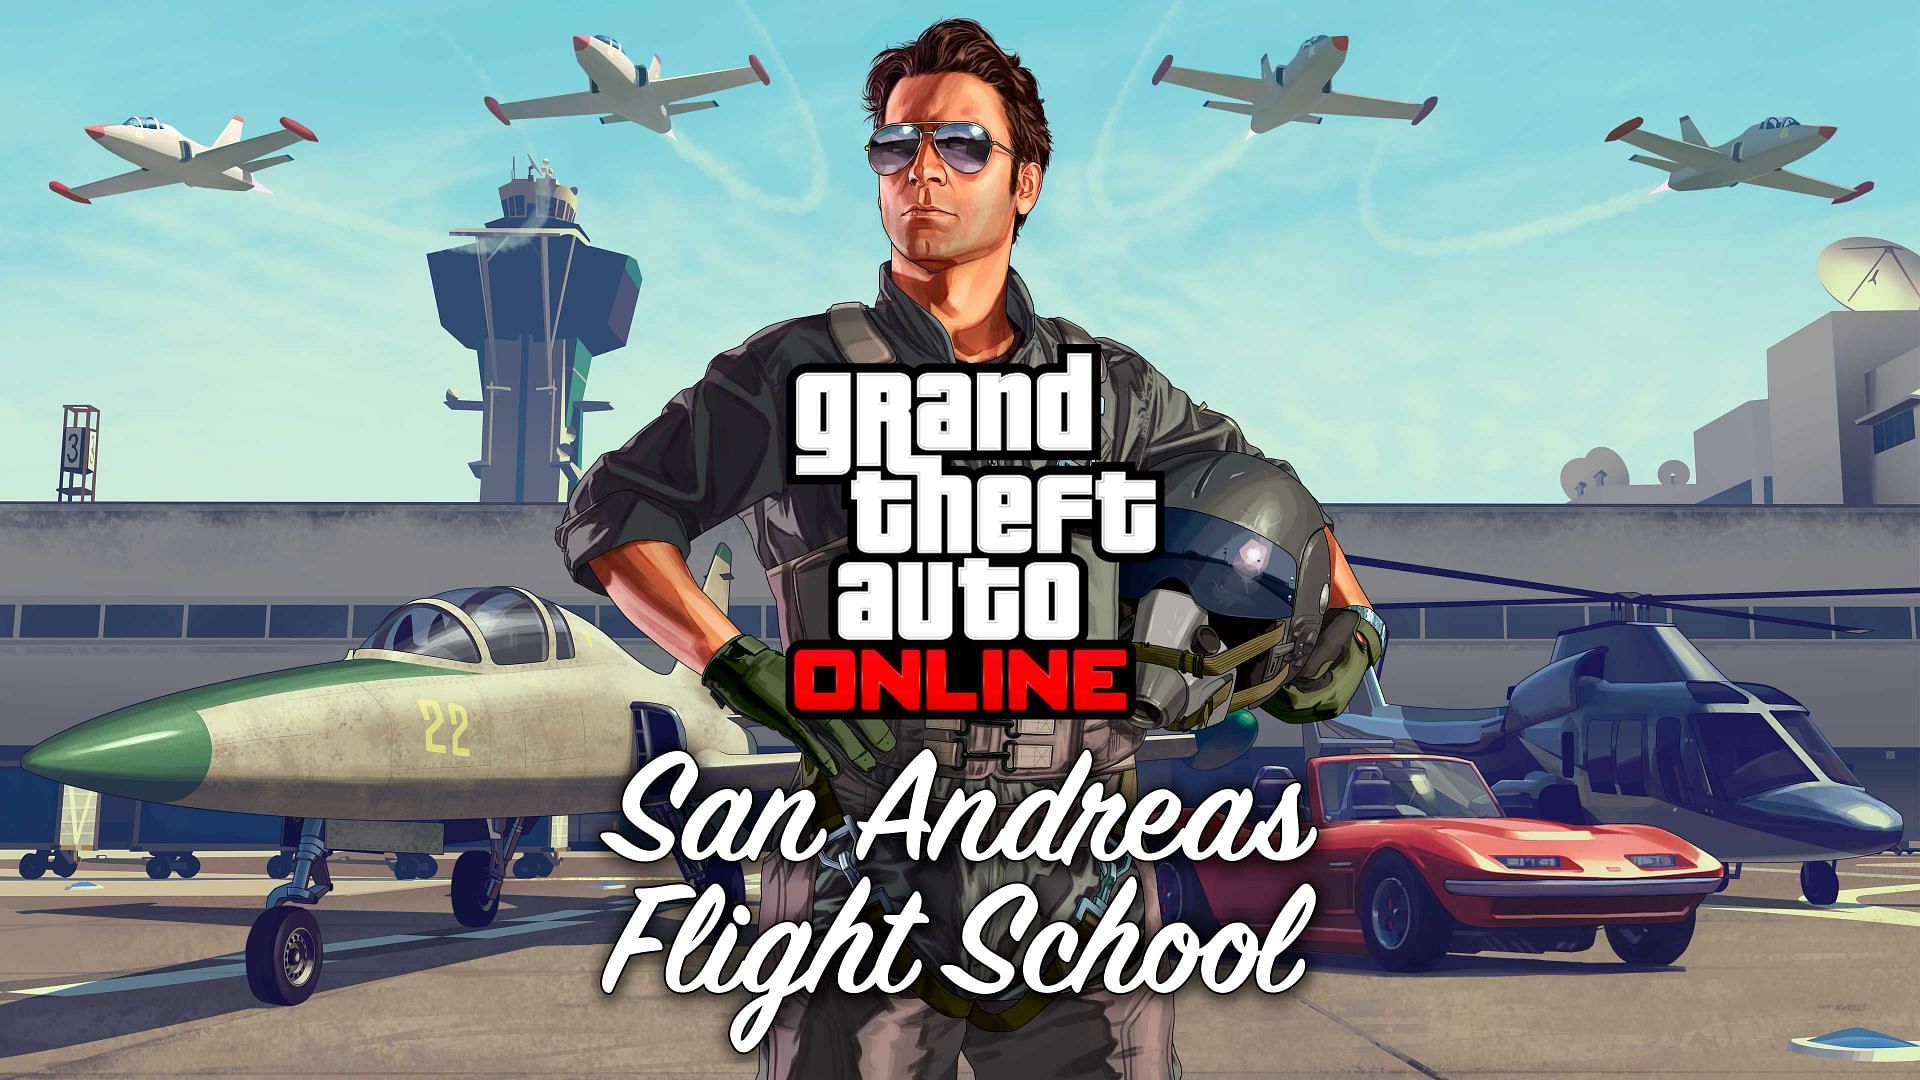 The school is located in LSIA (Image via Rockstar Games)